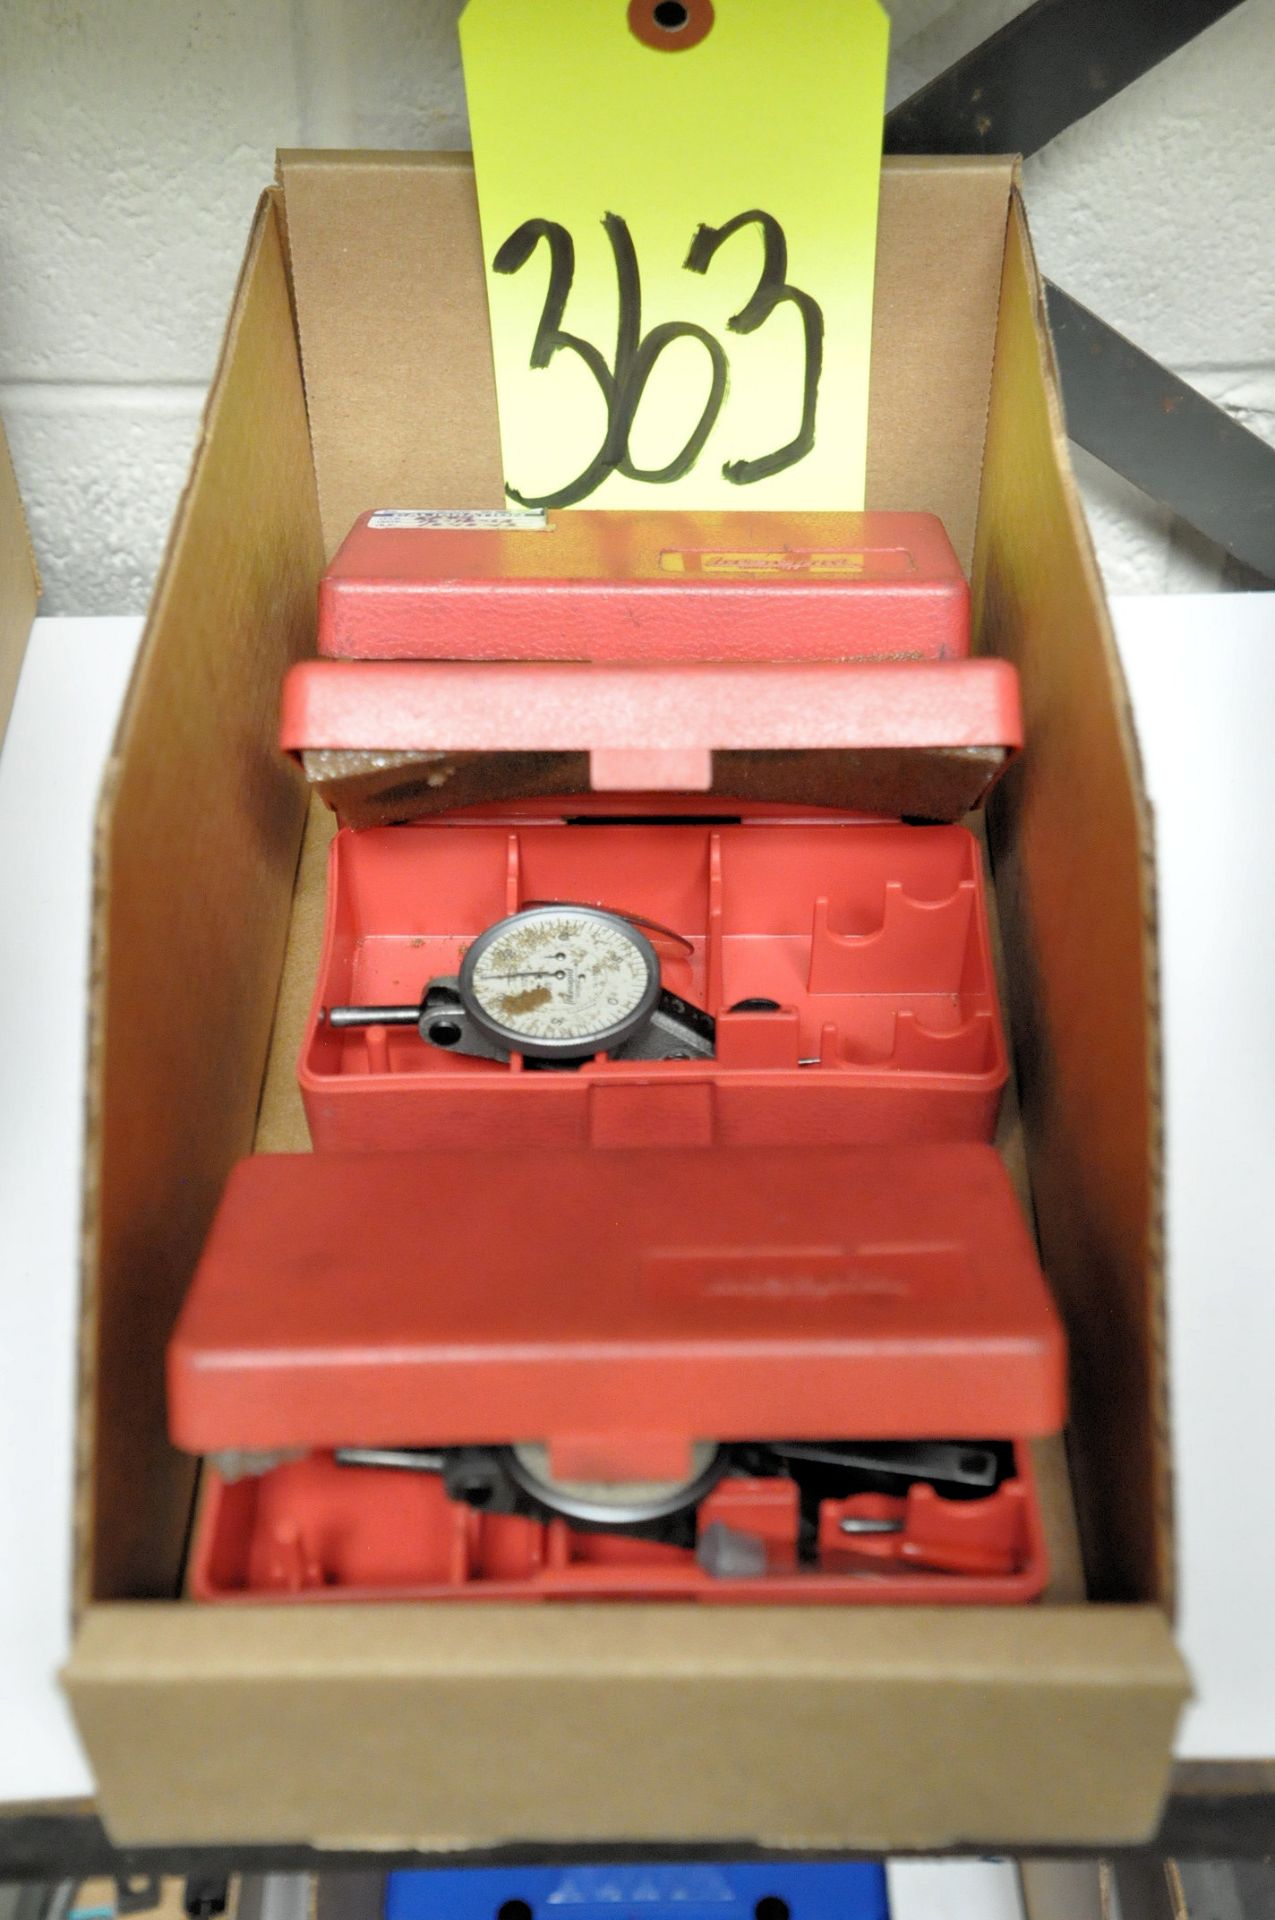 Lot-(3) Various Dial Force Indicator Gauges in (1) Box